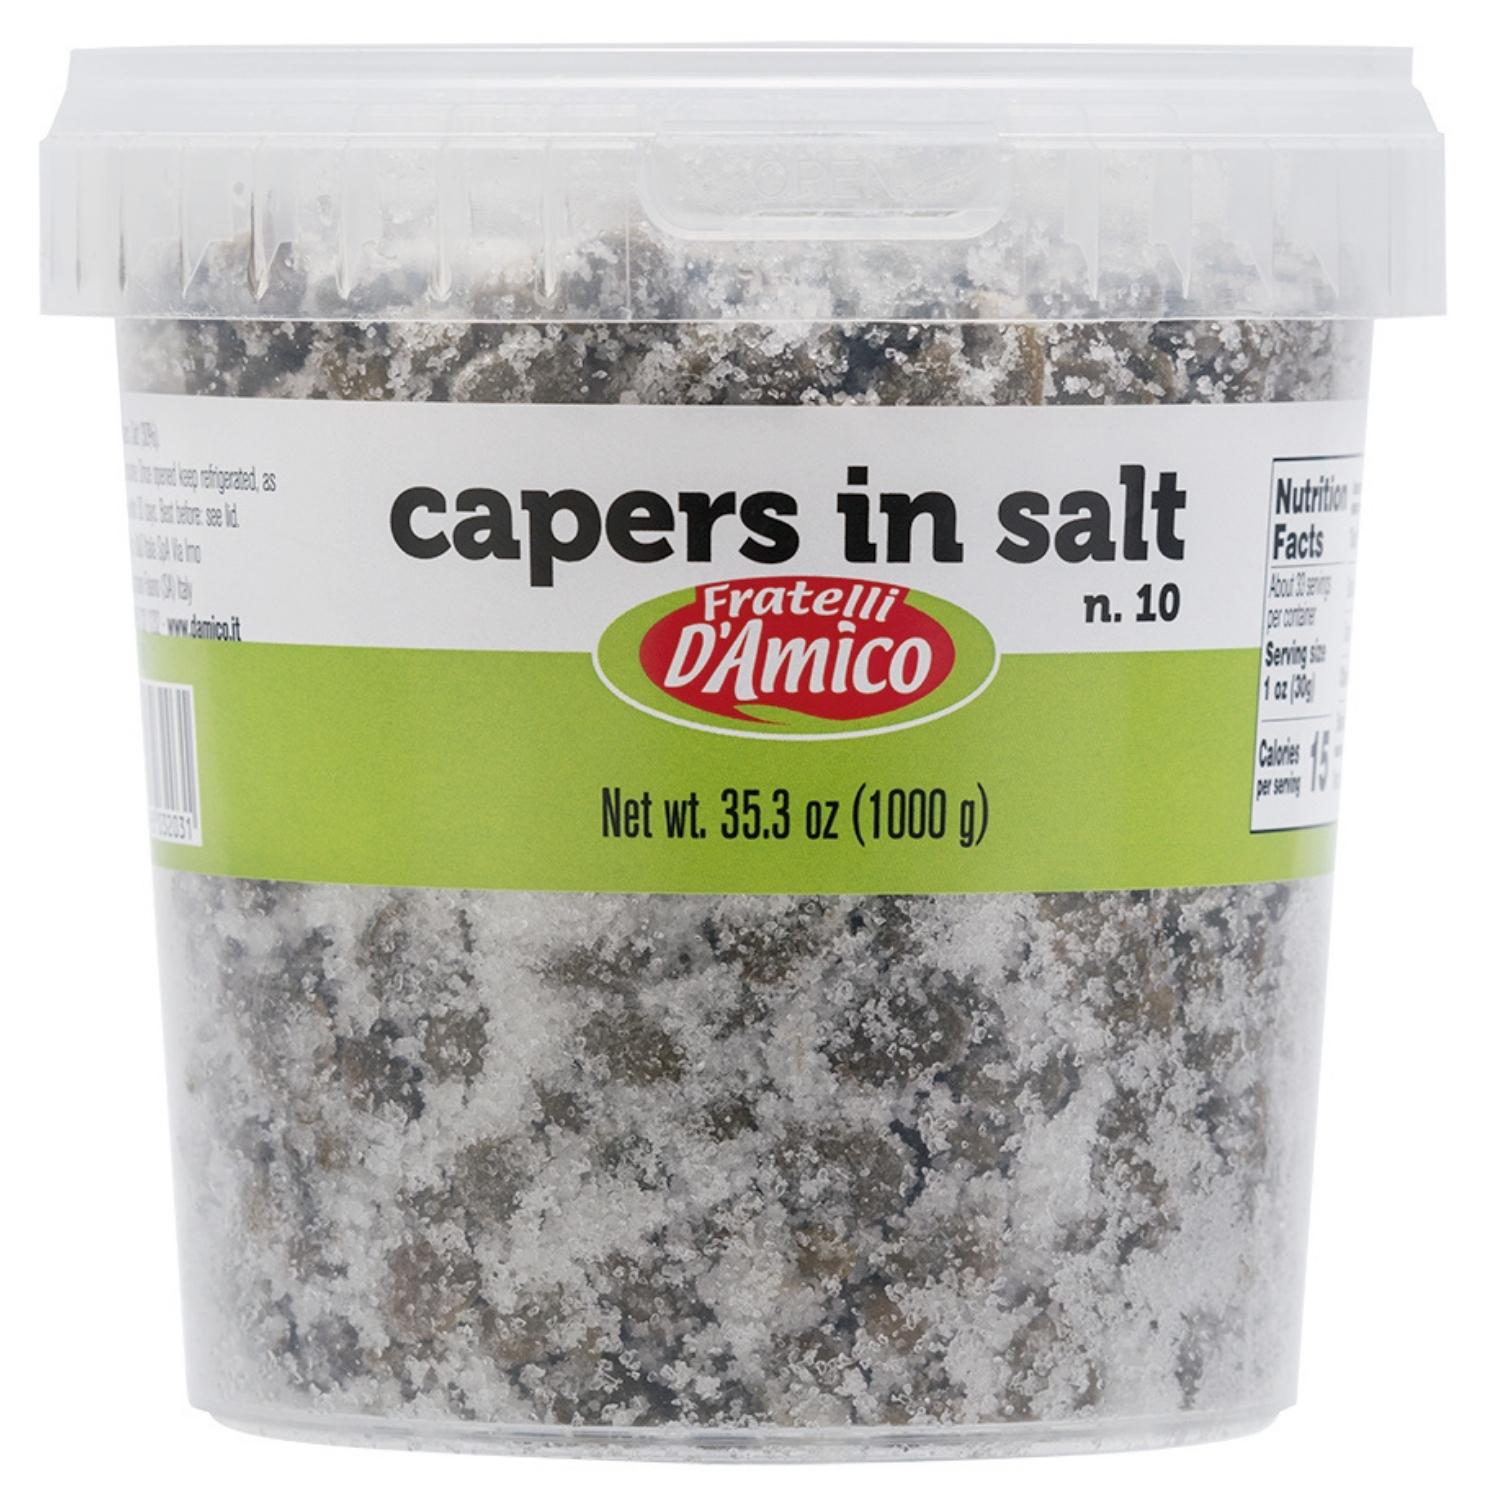 Fratelli D'Amico Capers in Salt n.10 Family Size, Net wt. 35.3oz (1000g)